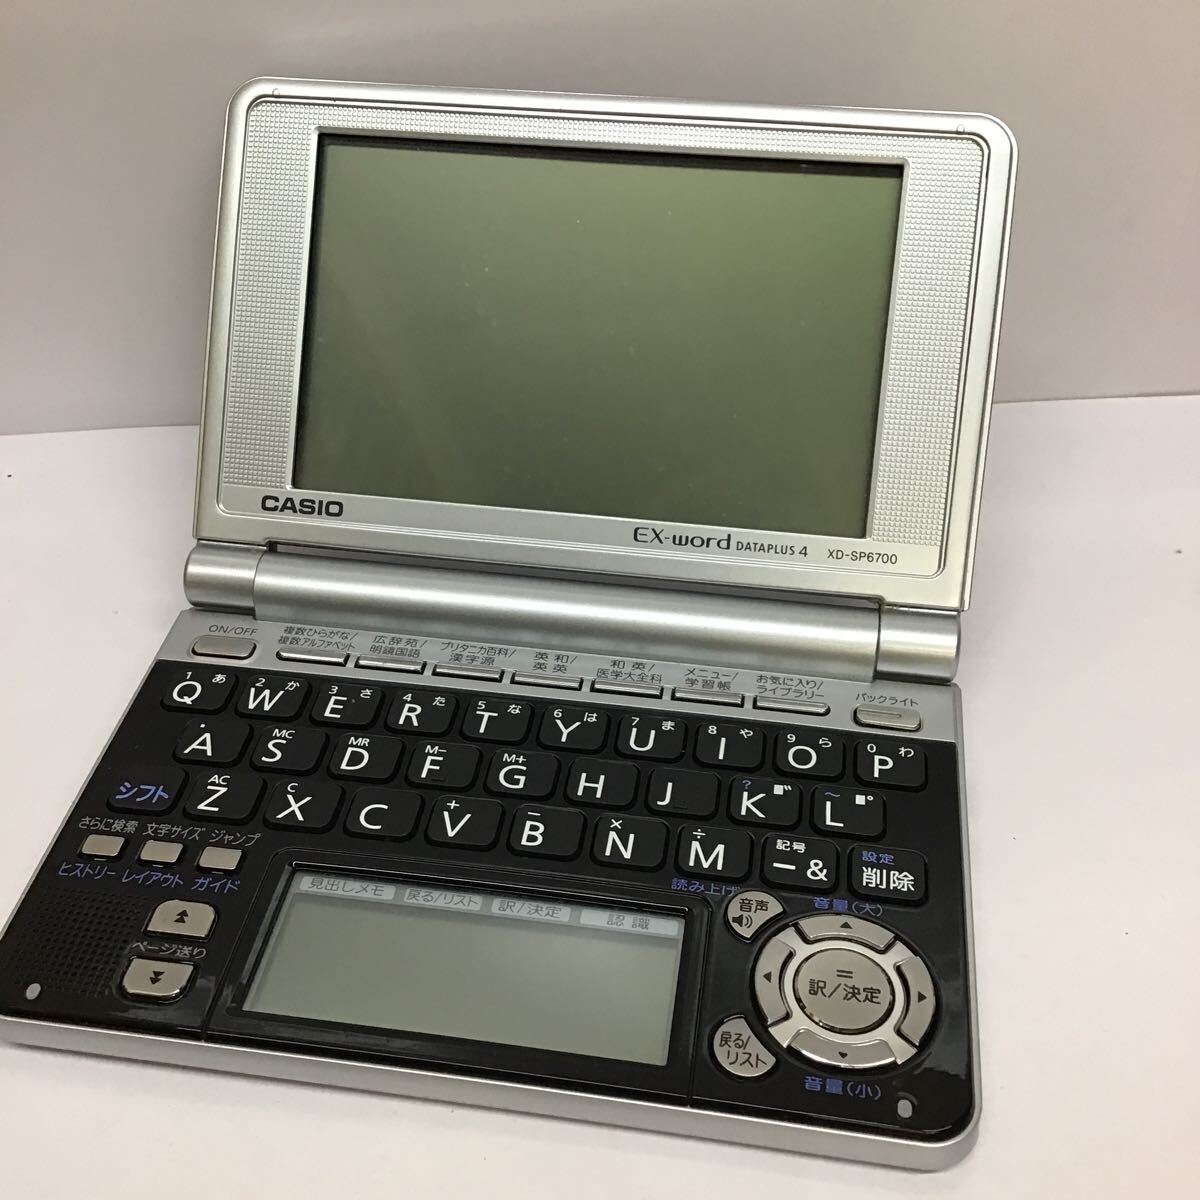 CASIO EX-word computerized dictionary XD-SP6700 100 contents many dictionary neitib7 pieces country TTS sound correspondence main panel handwriting . panel installing [ Junk ]